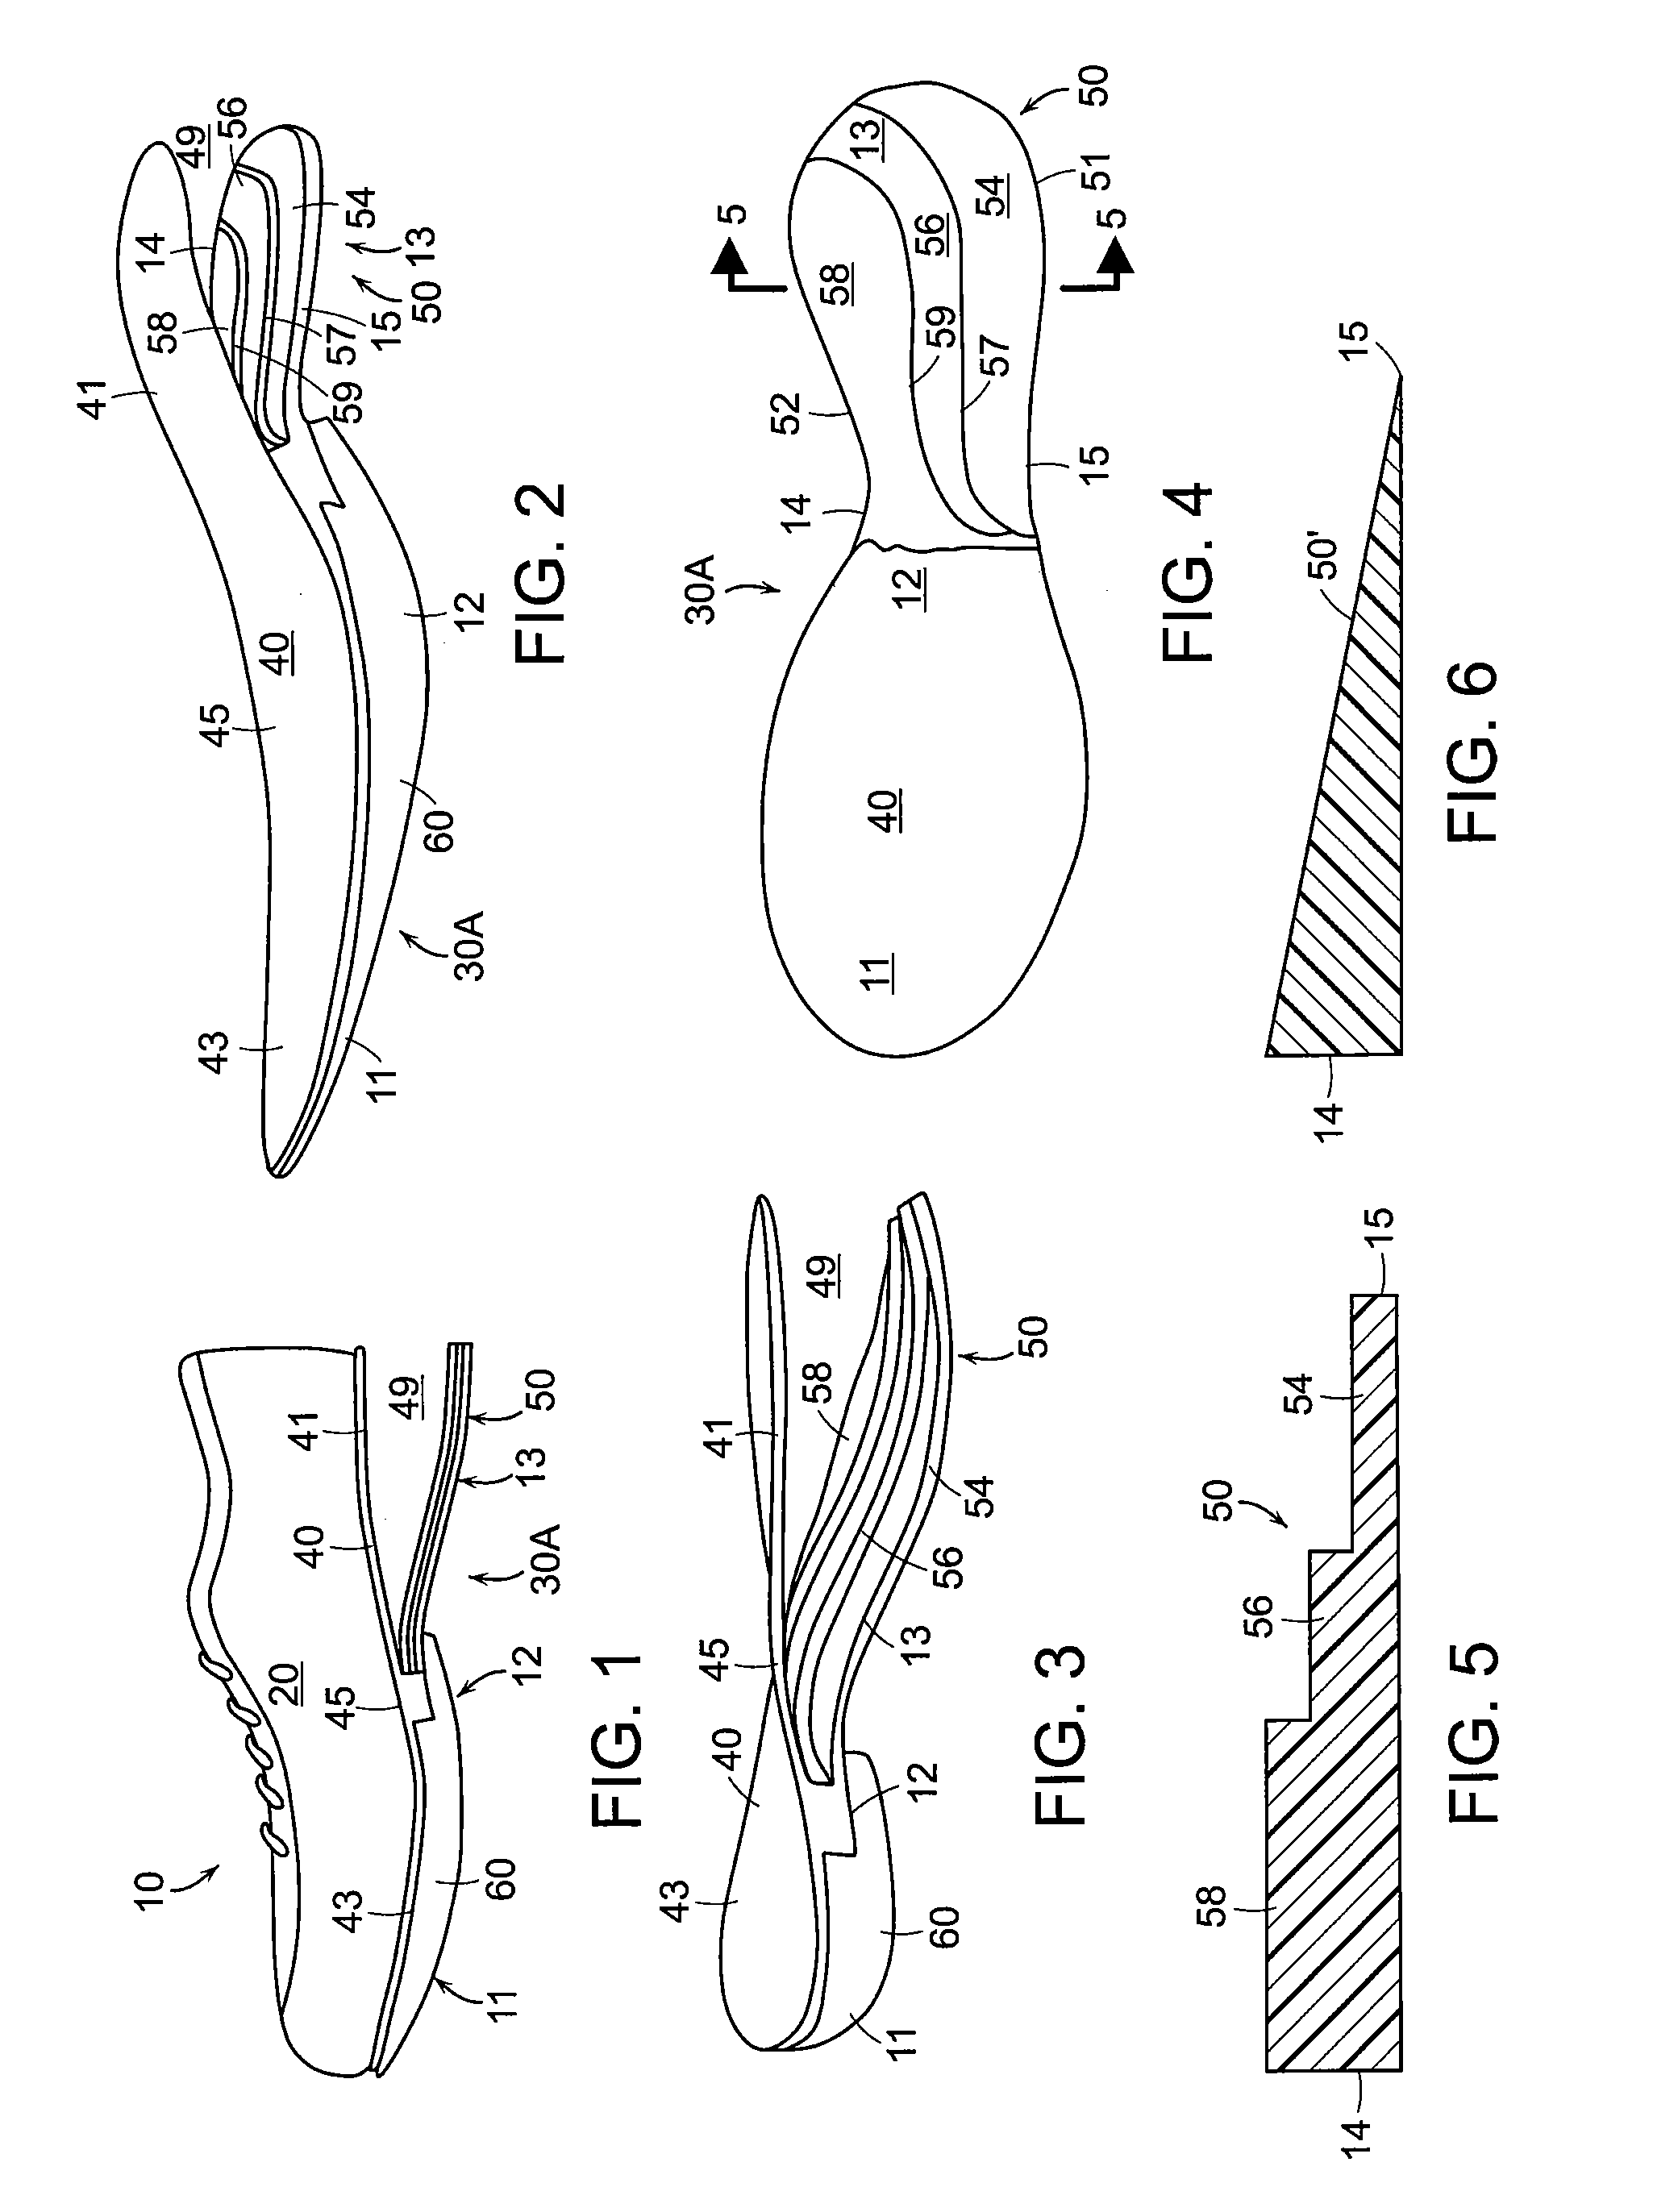 Footwear with a heel plate assembly